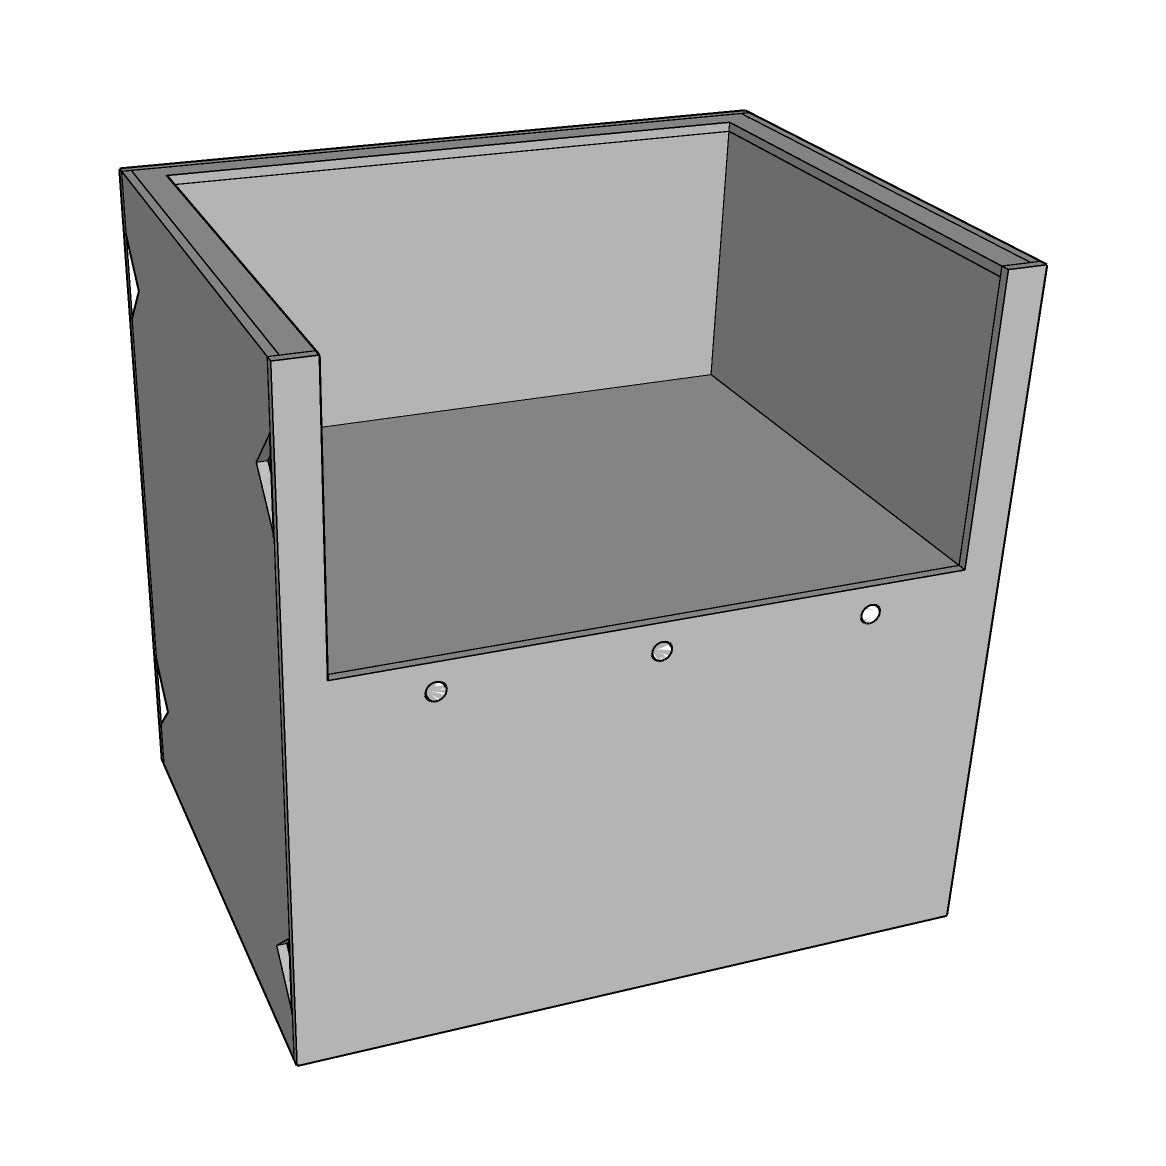 CABINET FOR KAMADO or POWER BURNER for Outdoor Kitchen | Width: 36"or 48" | Height: 36”(STD) or 31”(ADA) | Depth: 29” | Bar and Backsplash Options | Ready to Assemble and Finish